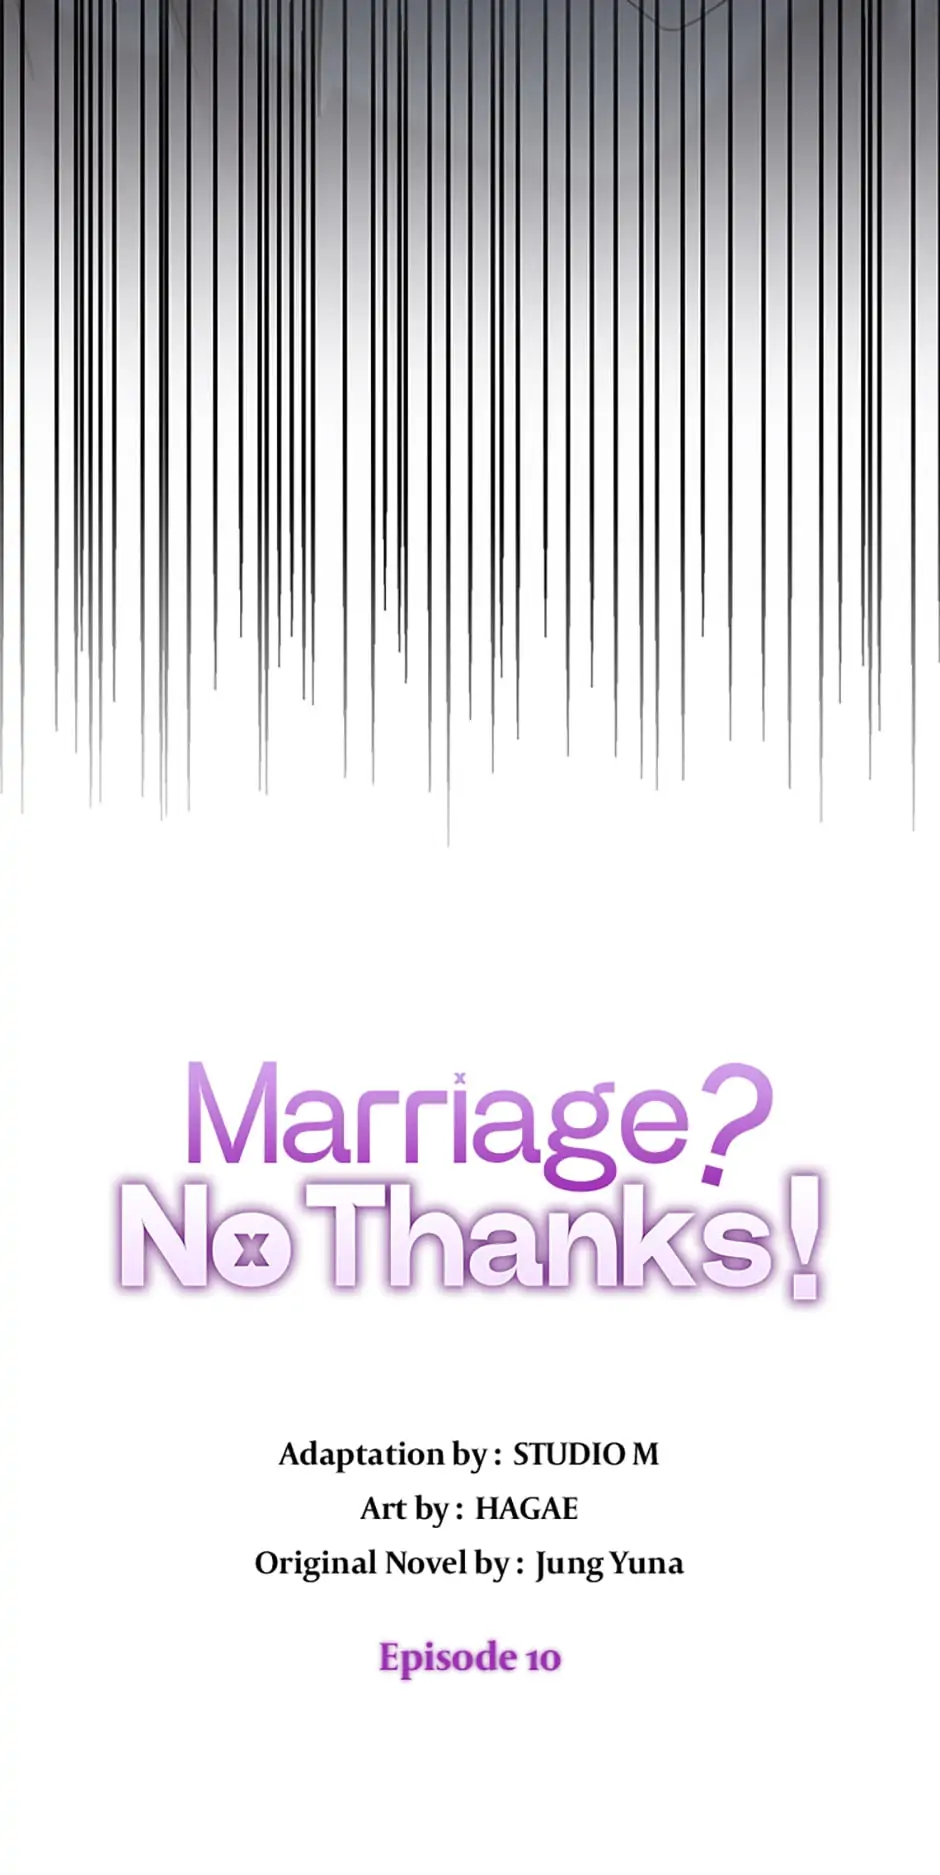 Read Marriage? No Thanks!